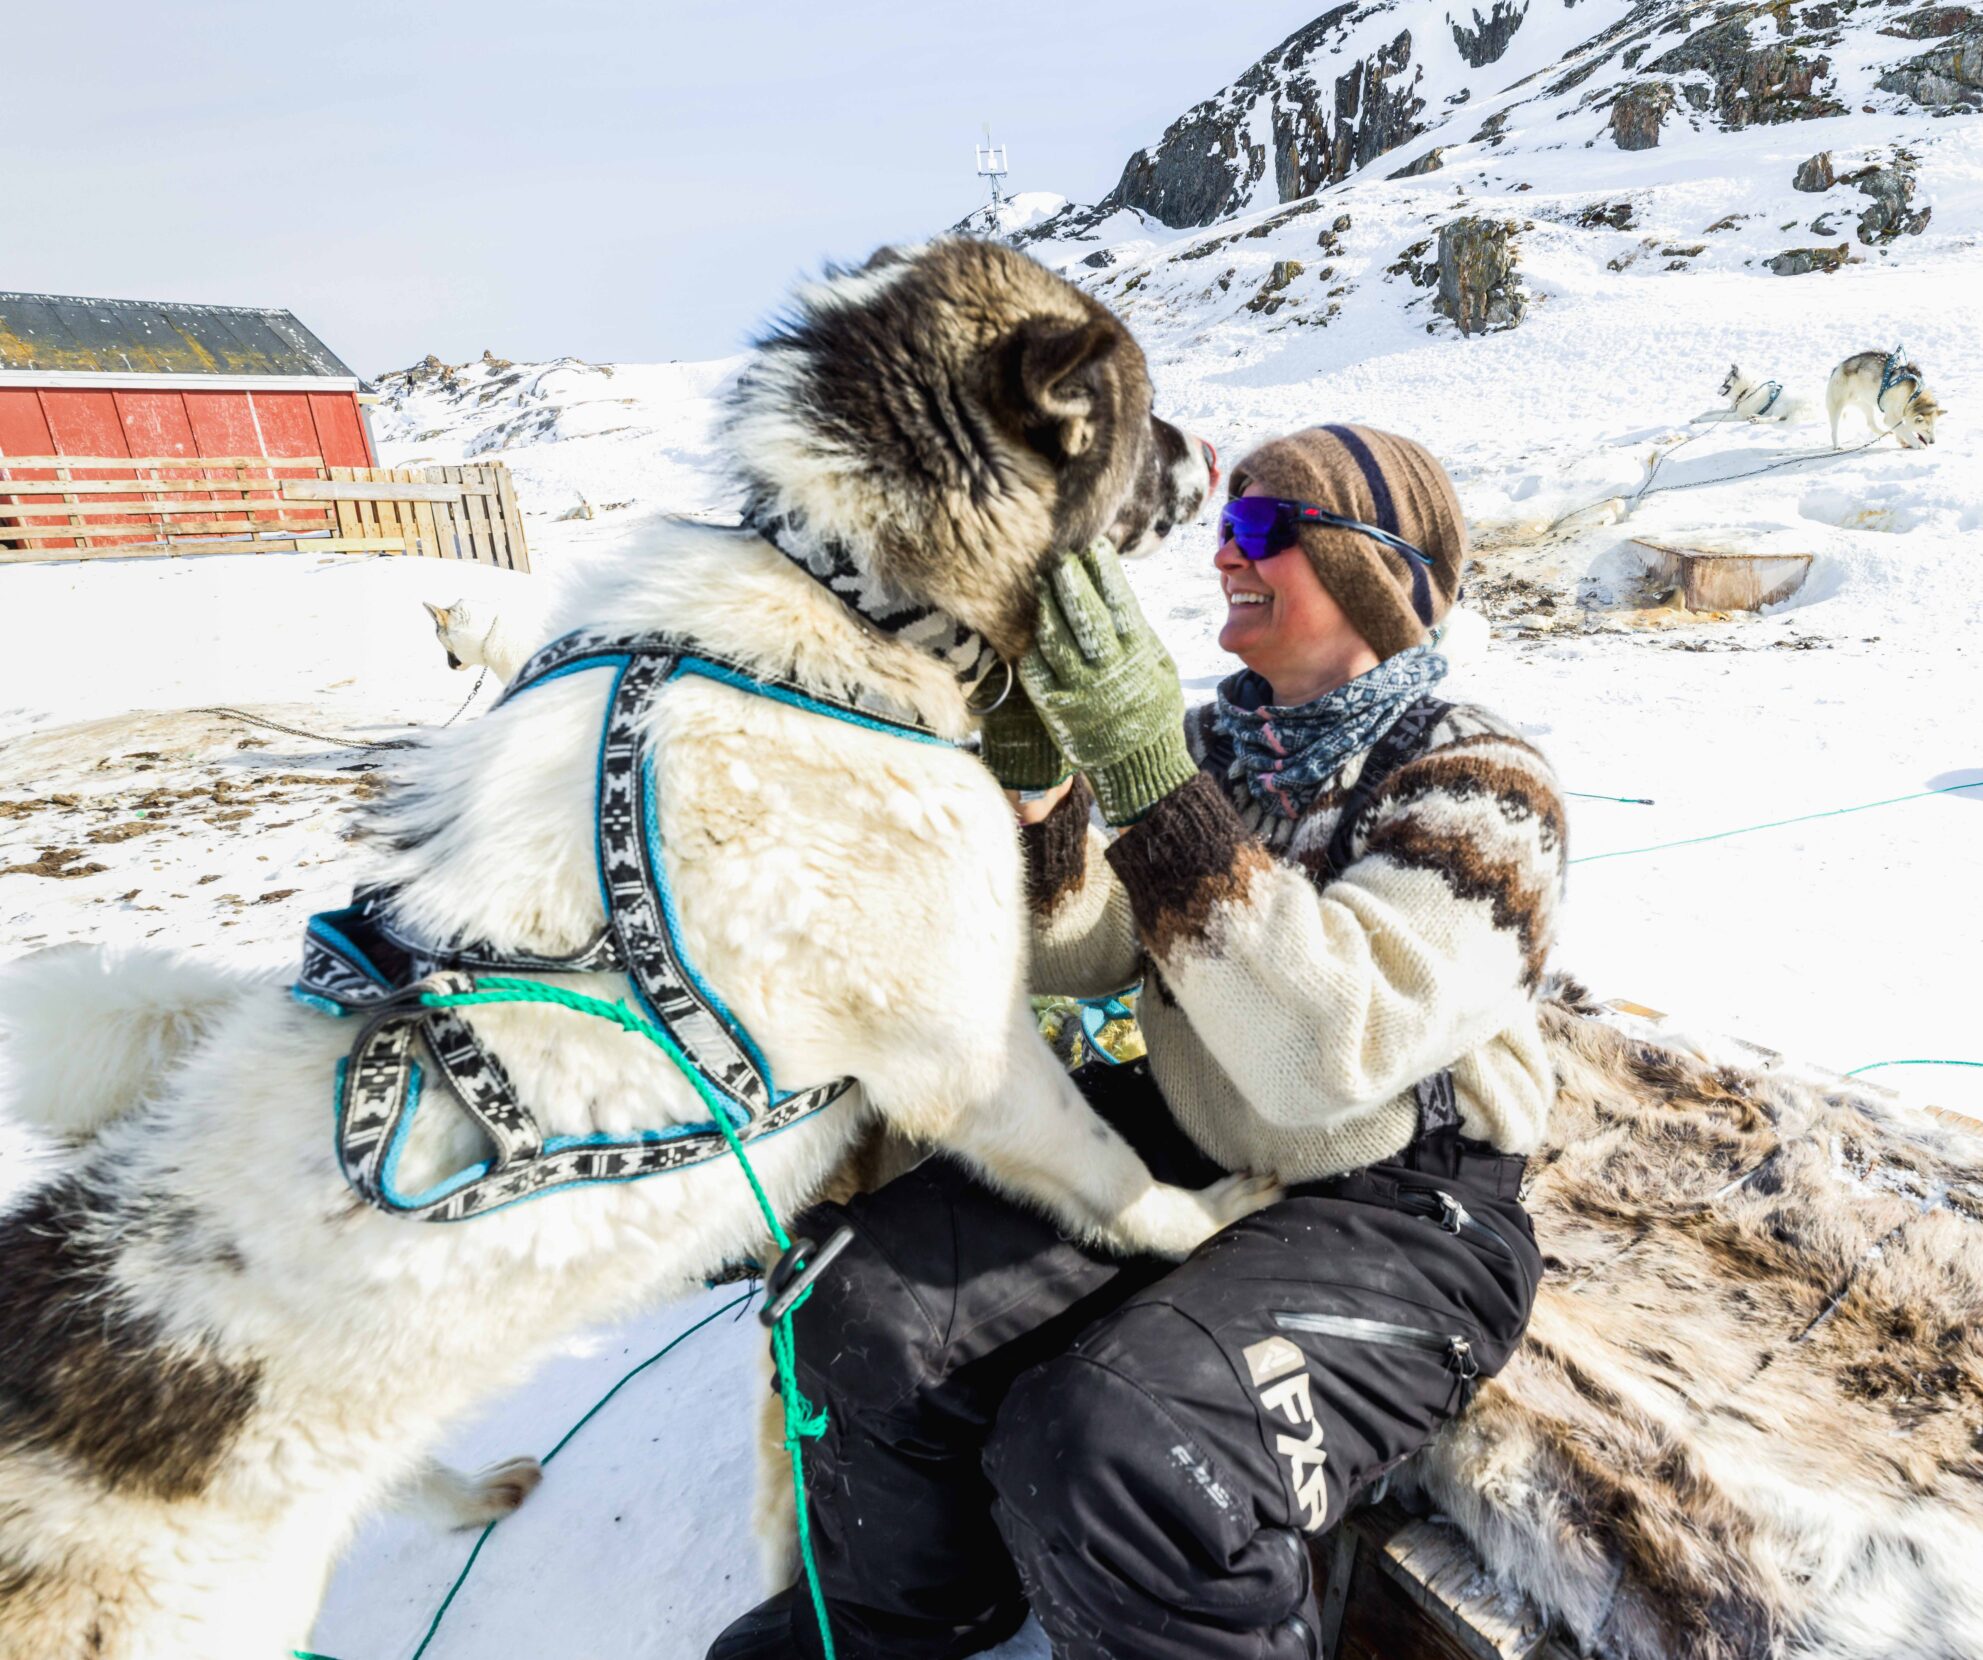 A large Greenlandic dog paws the lap of a smiling woman.